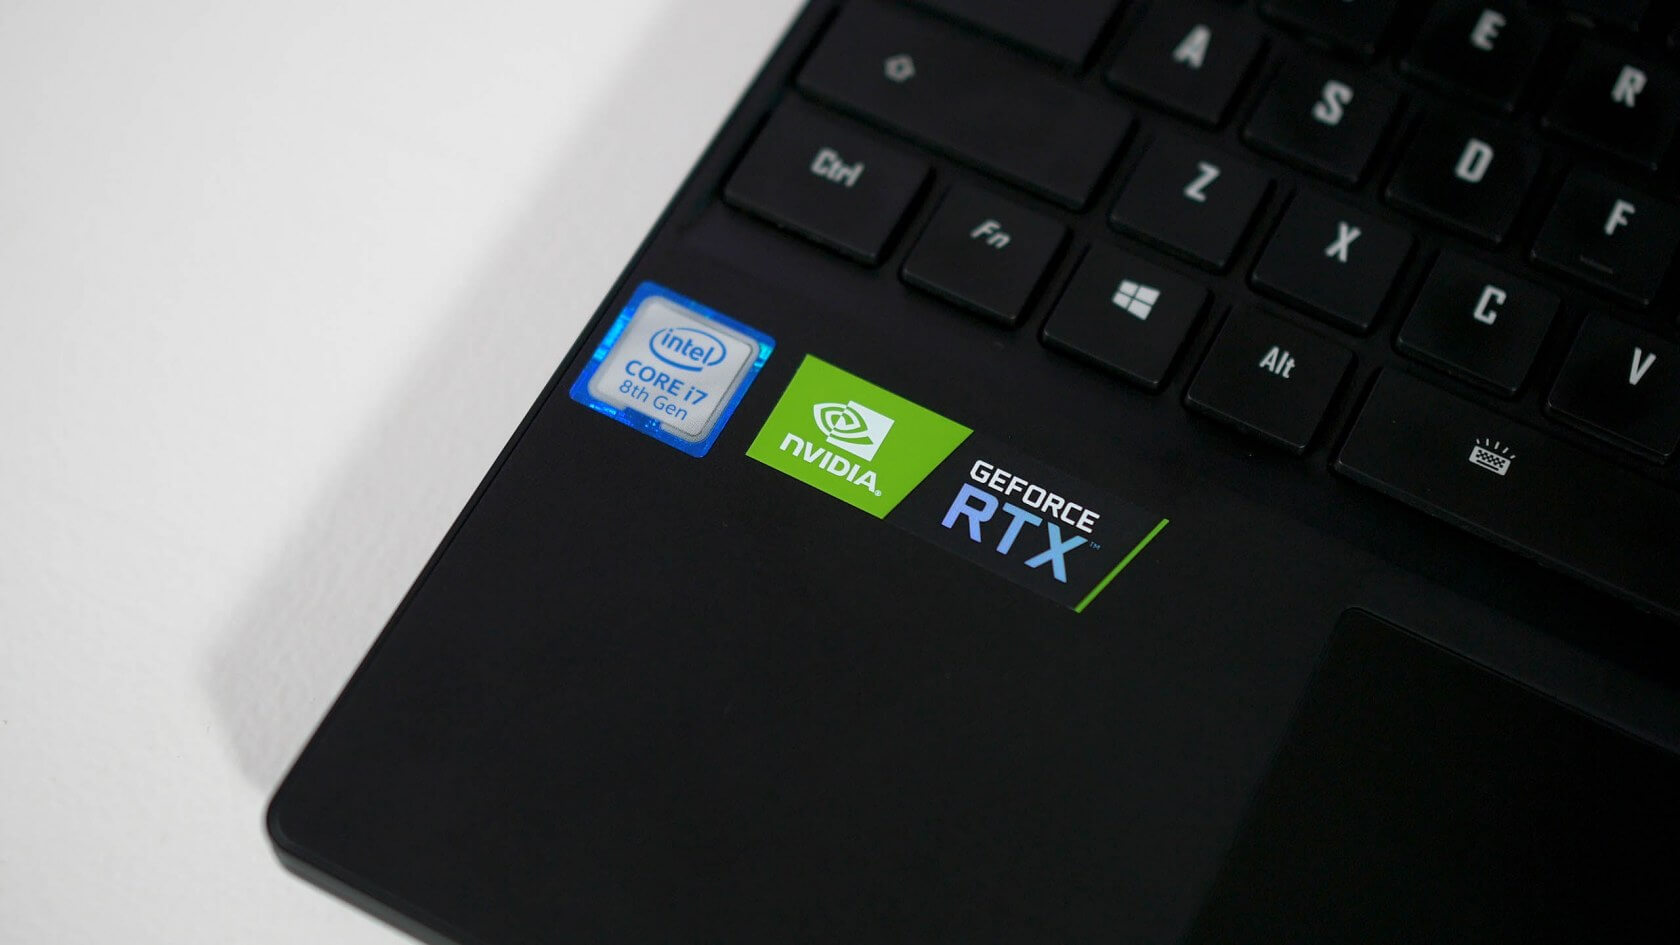 Rumor: Nvidia plans to bring Super refresh to notebooks in March 2020